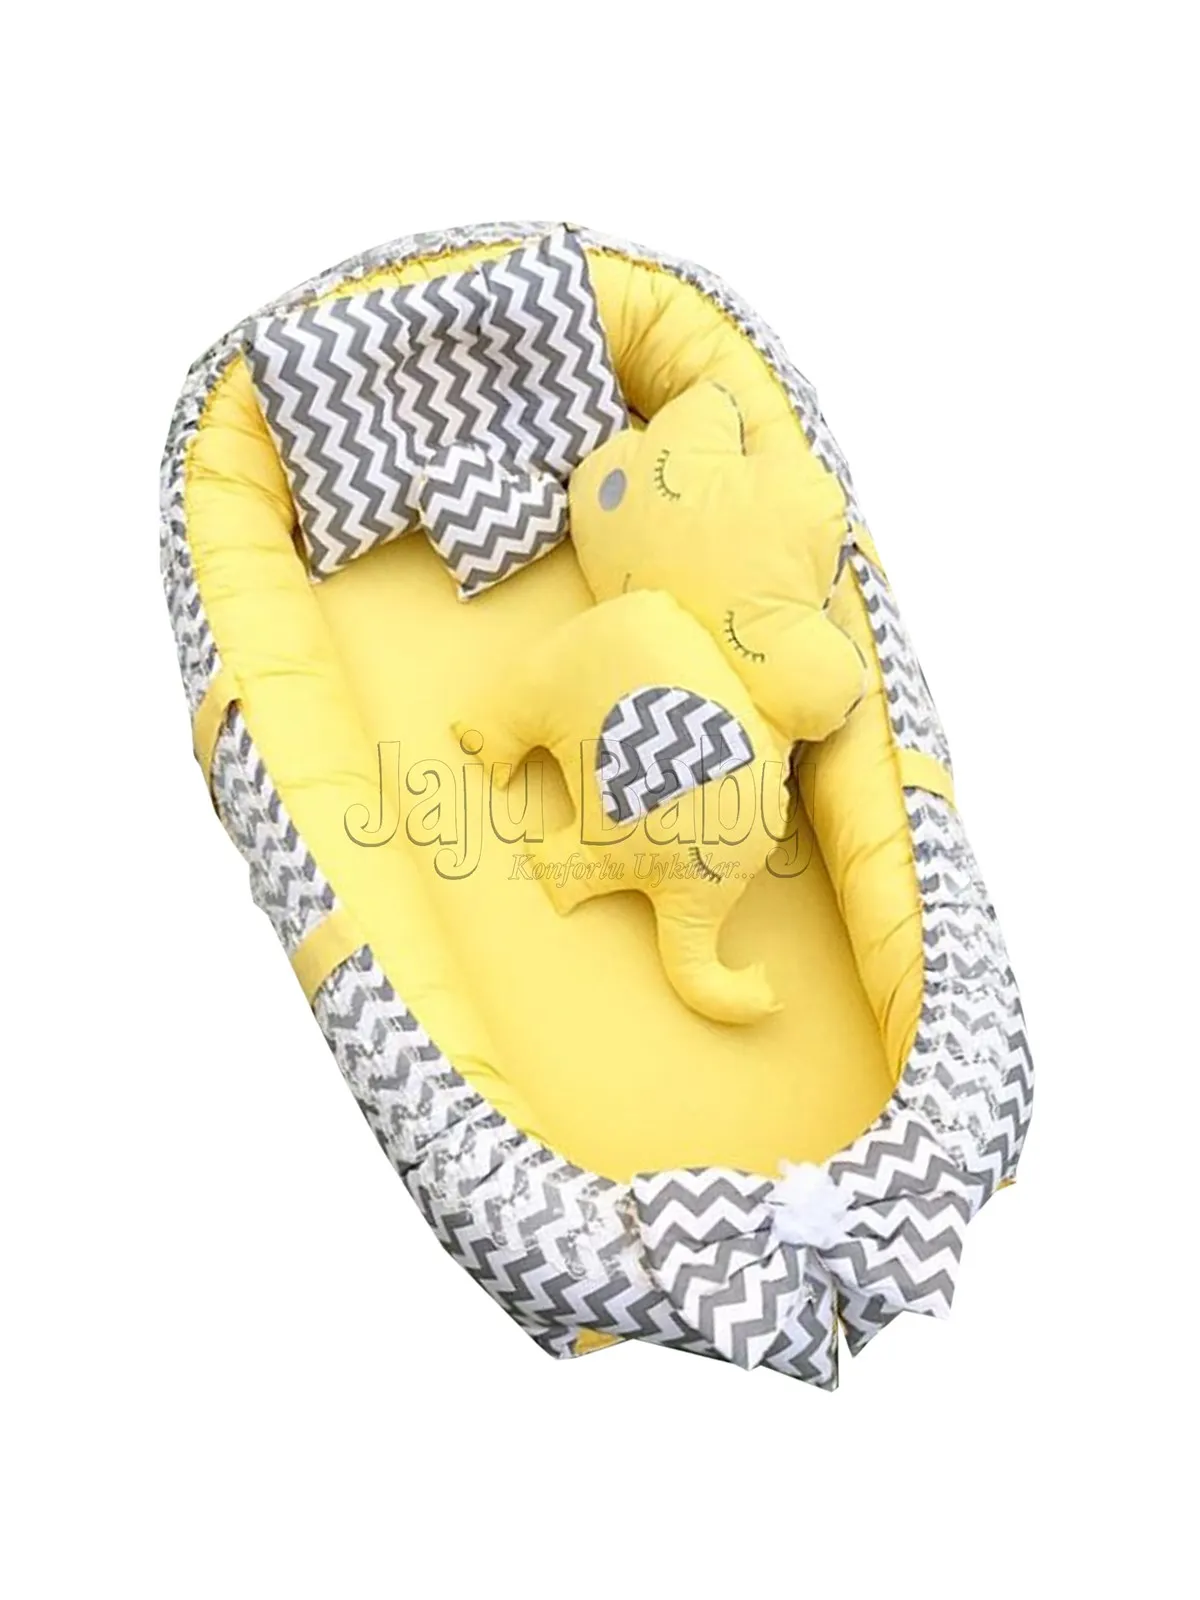 Jaju Baby Handmade, Gray Zigzag and Yellow Patterned 5 Piece Babynest Set Little Heart GIFT! Mother Side Portable Baby Bed